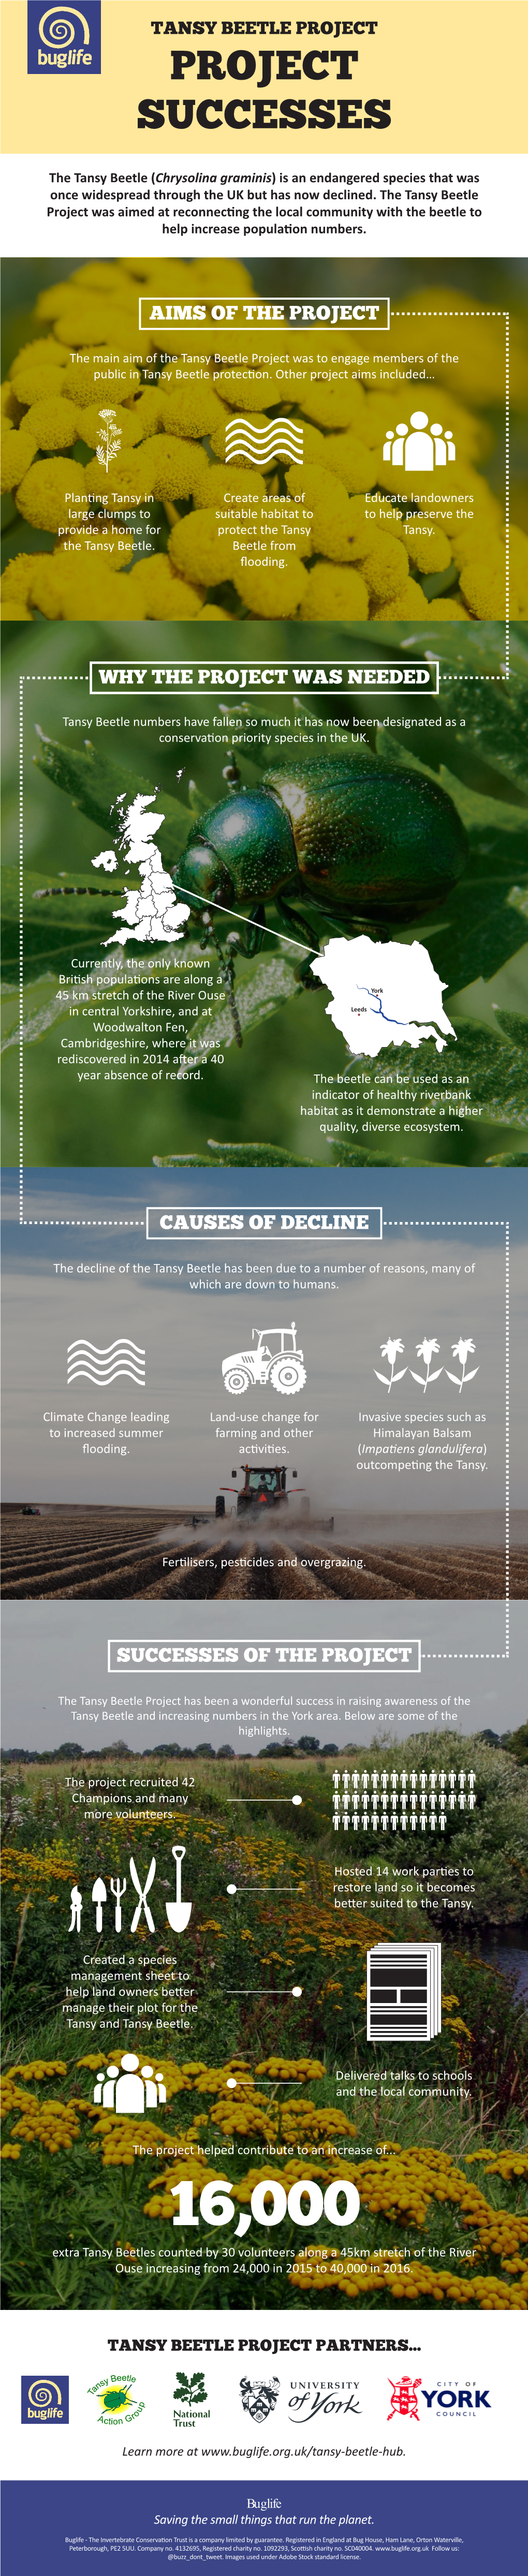 Tansy Beetle Infographic